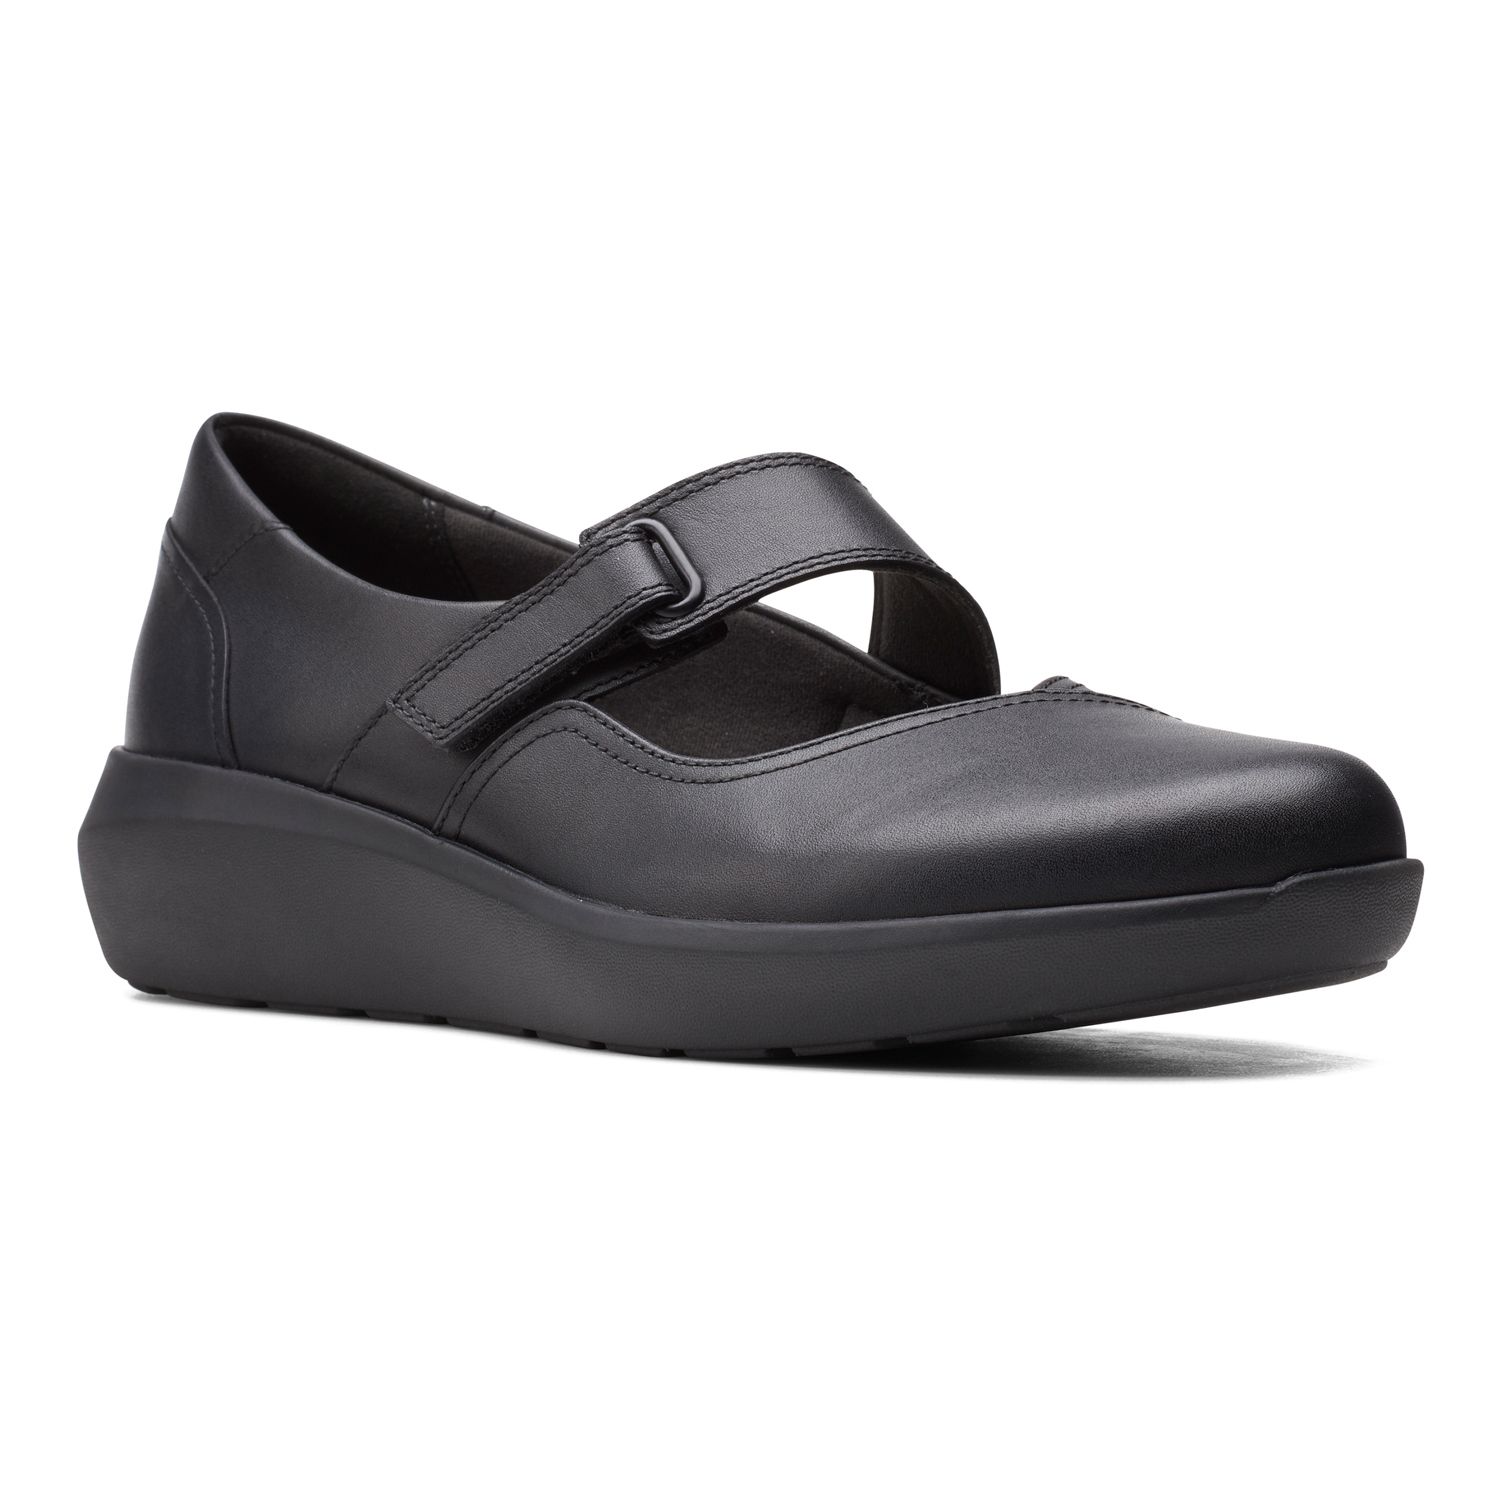 clarks mary janes sale